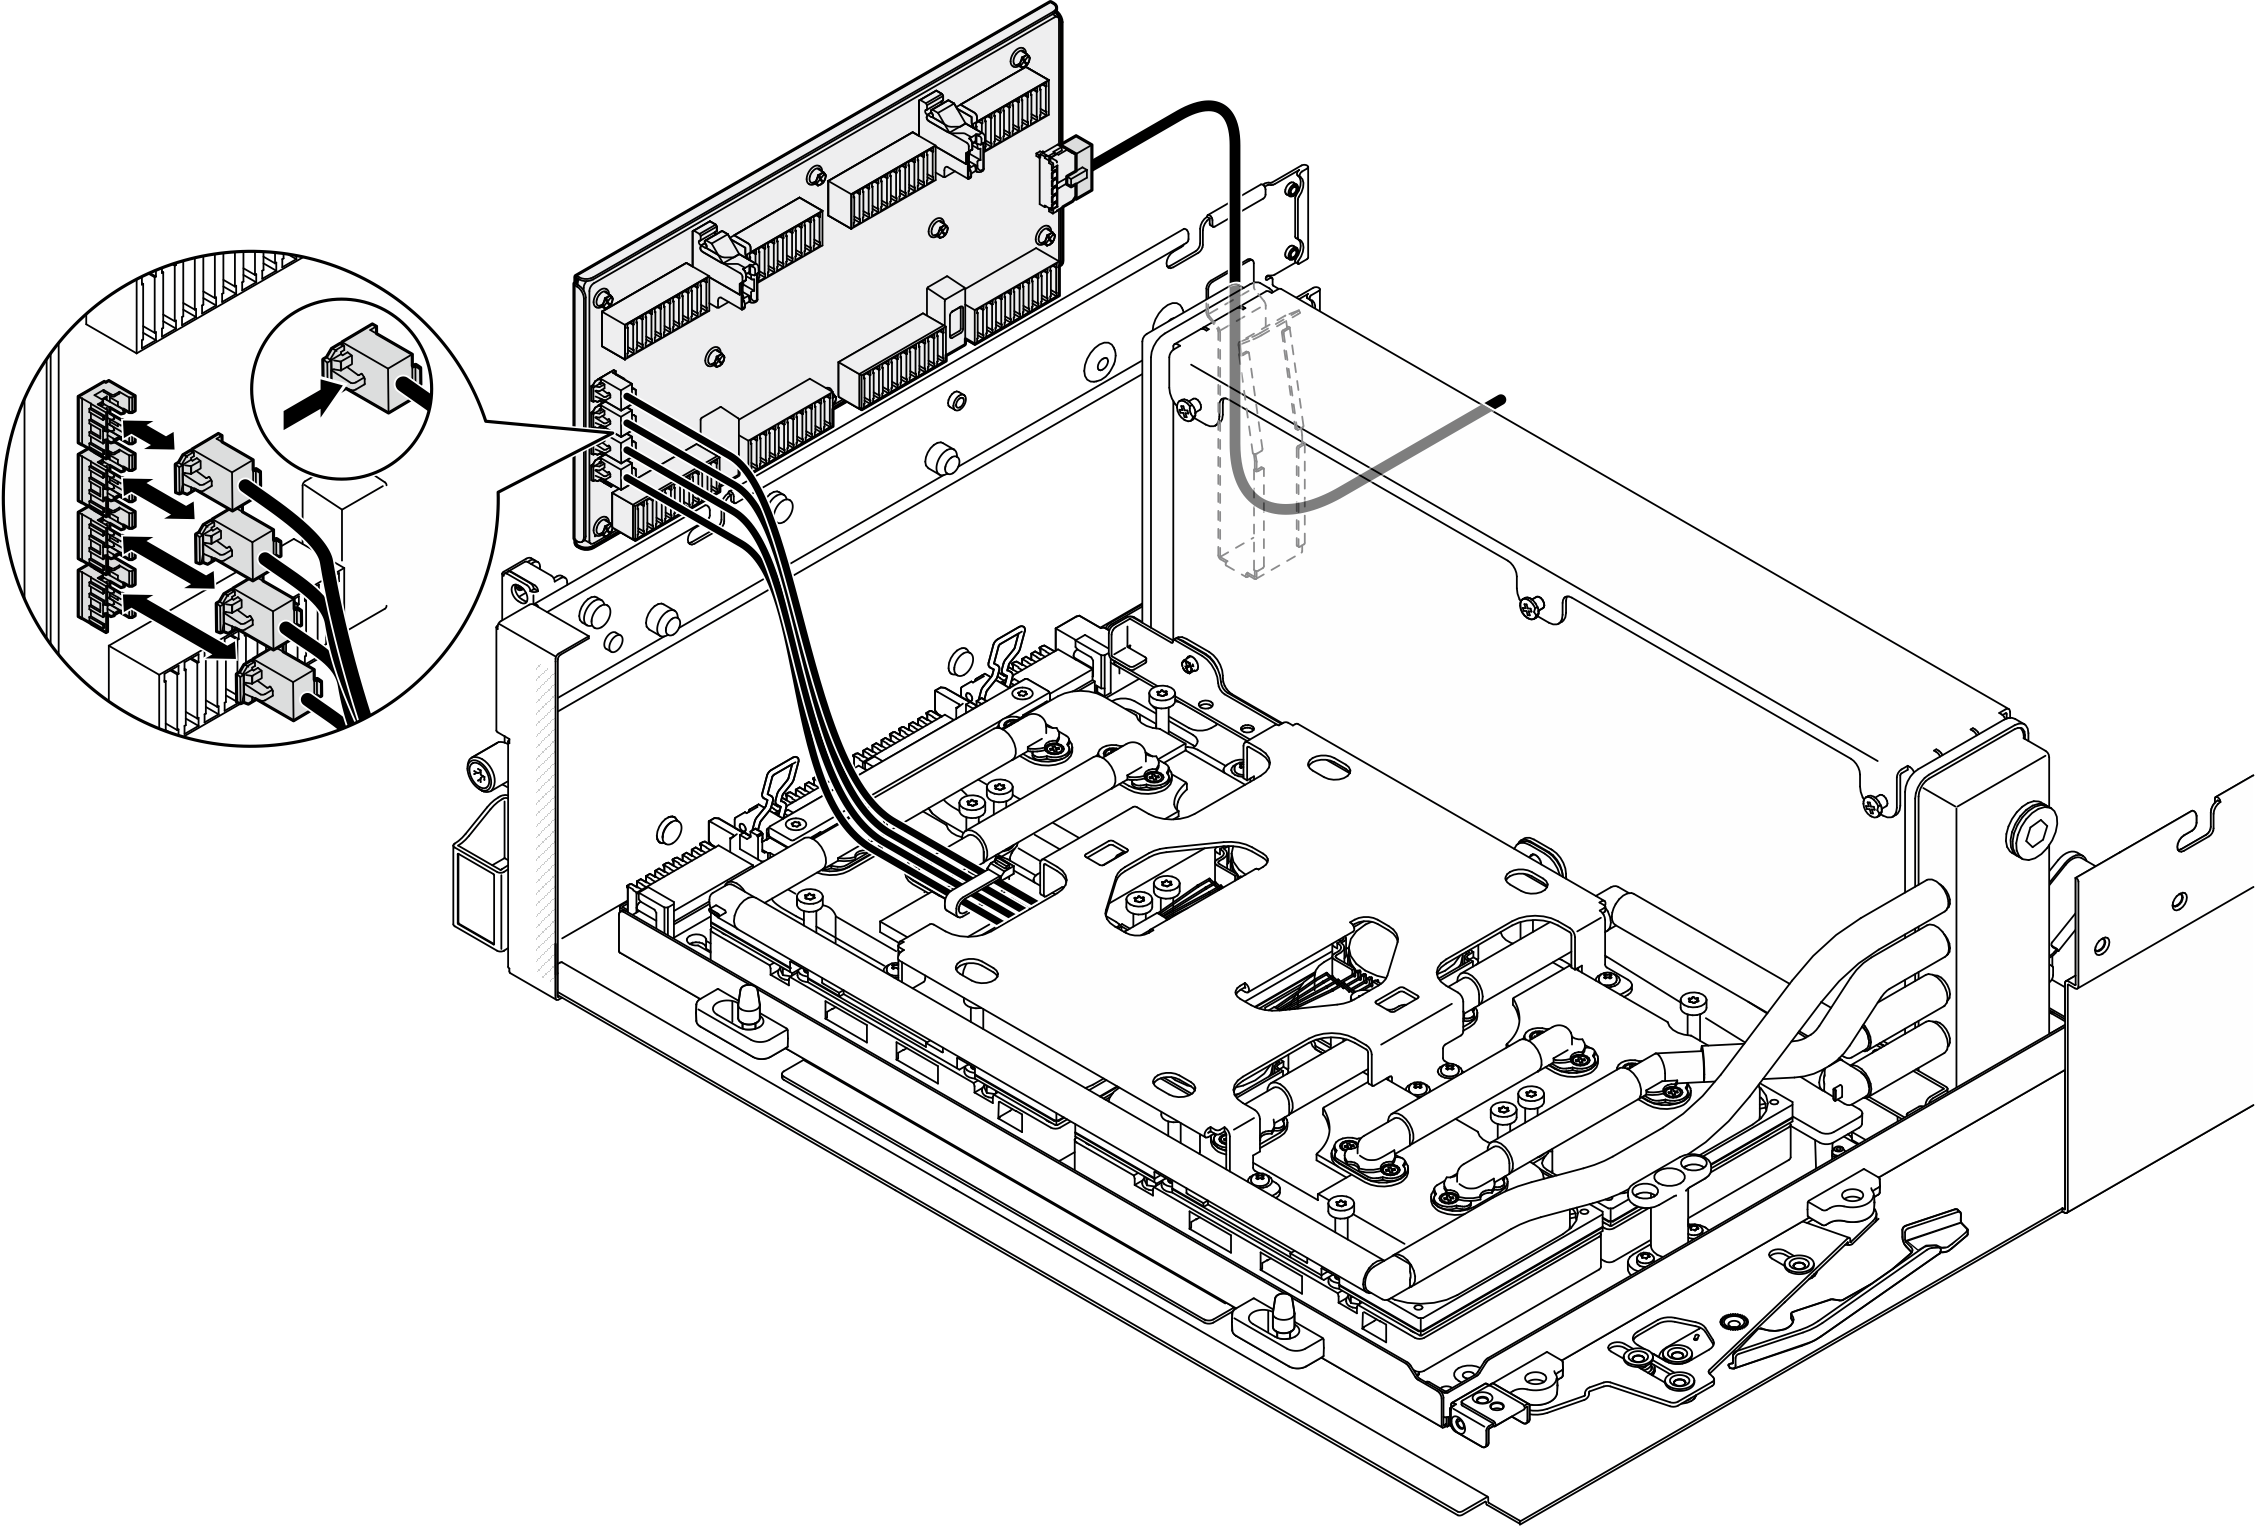 Cold plate assembly pump cable disconnection